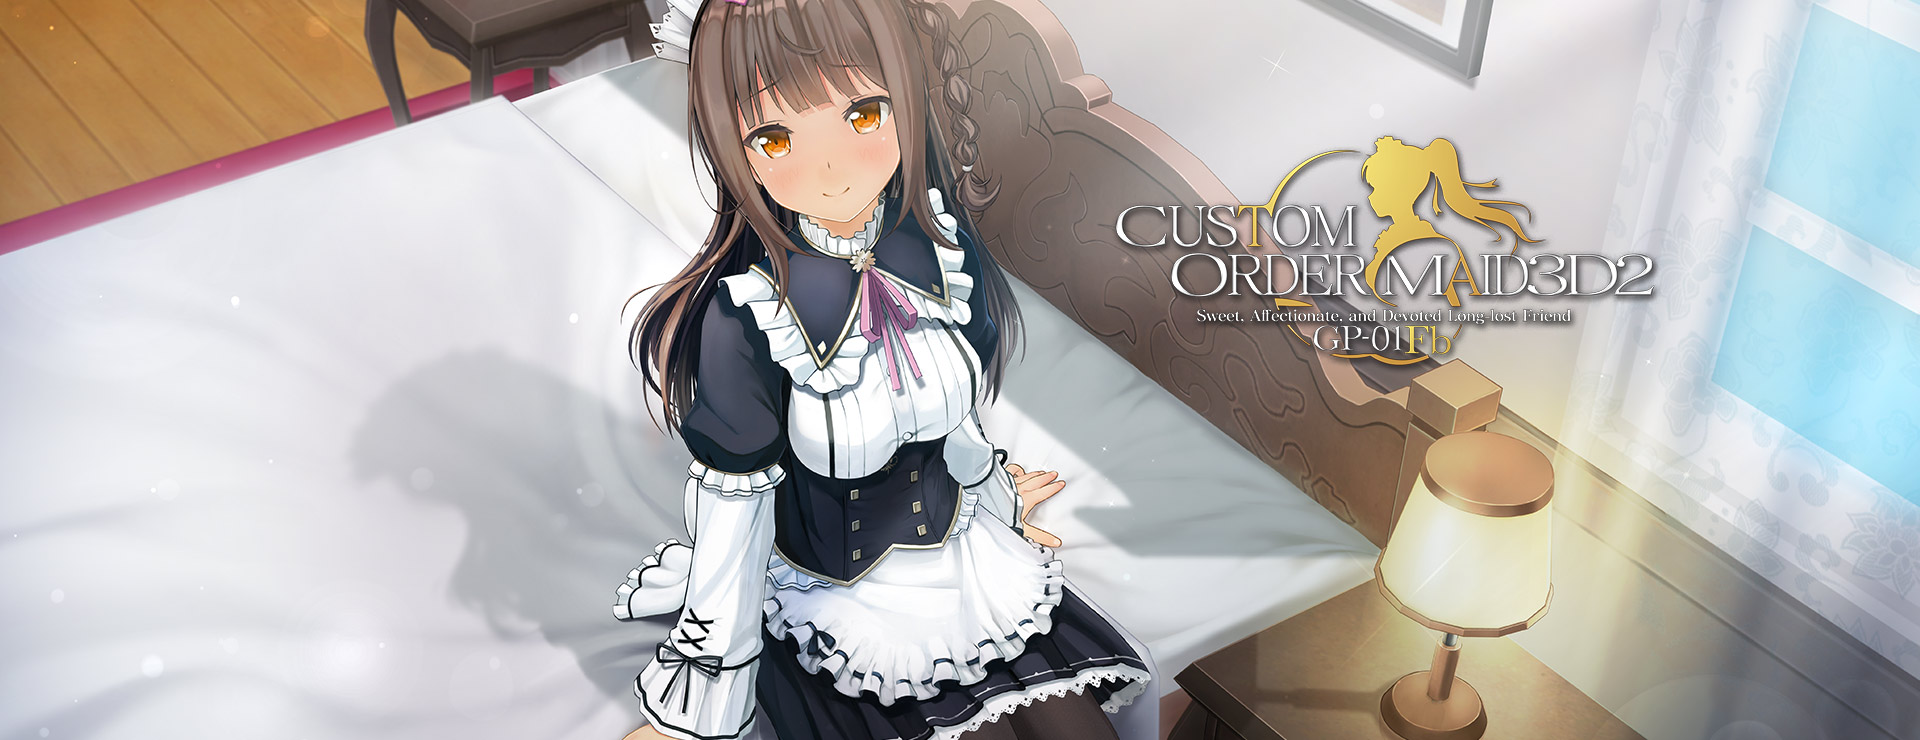 Custom Order Maid 3D 2: Sweet, Affectionate, and Devoted Long-lost Friend GP-01Fb - Simulación Juego